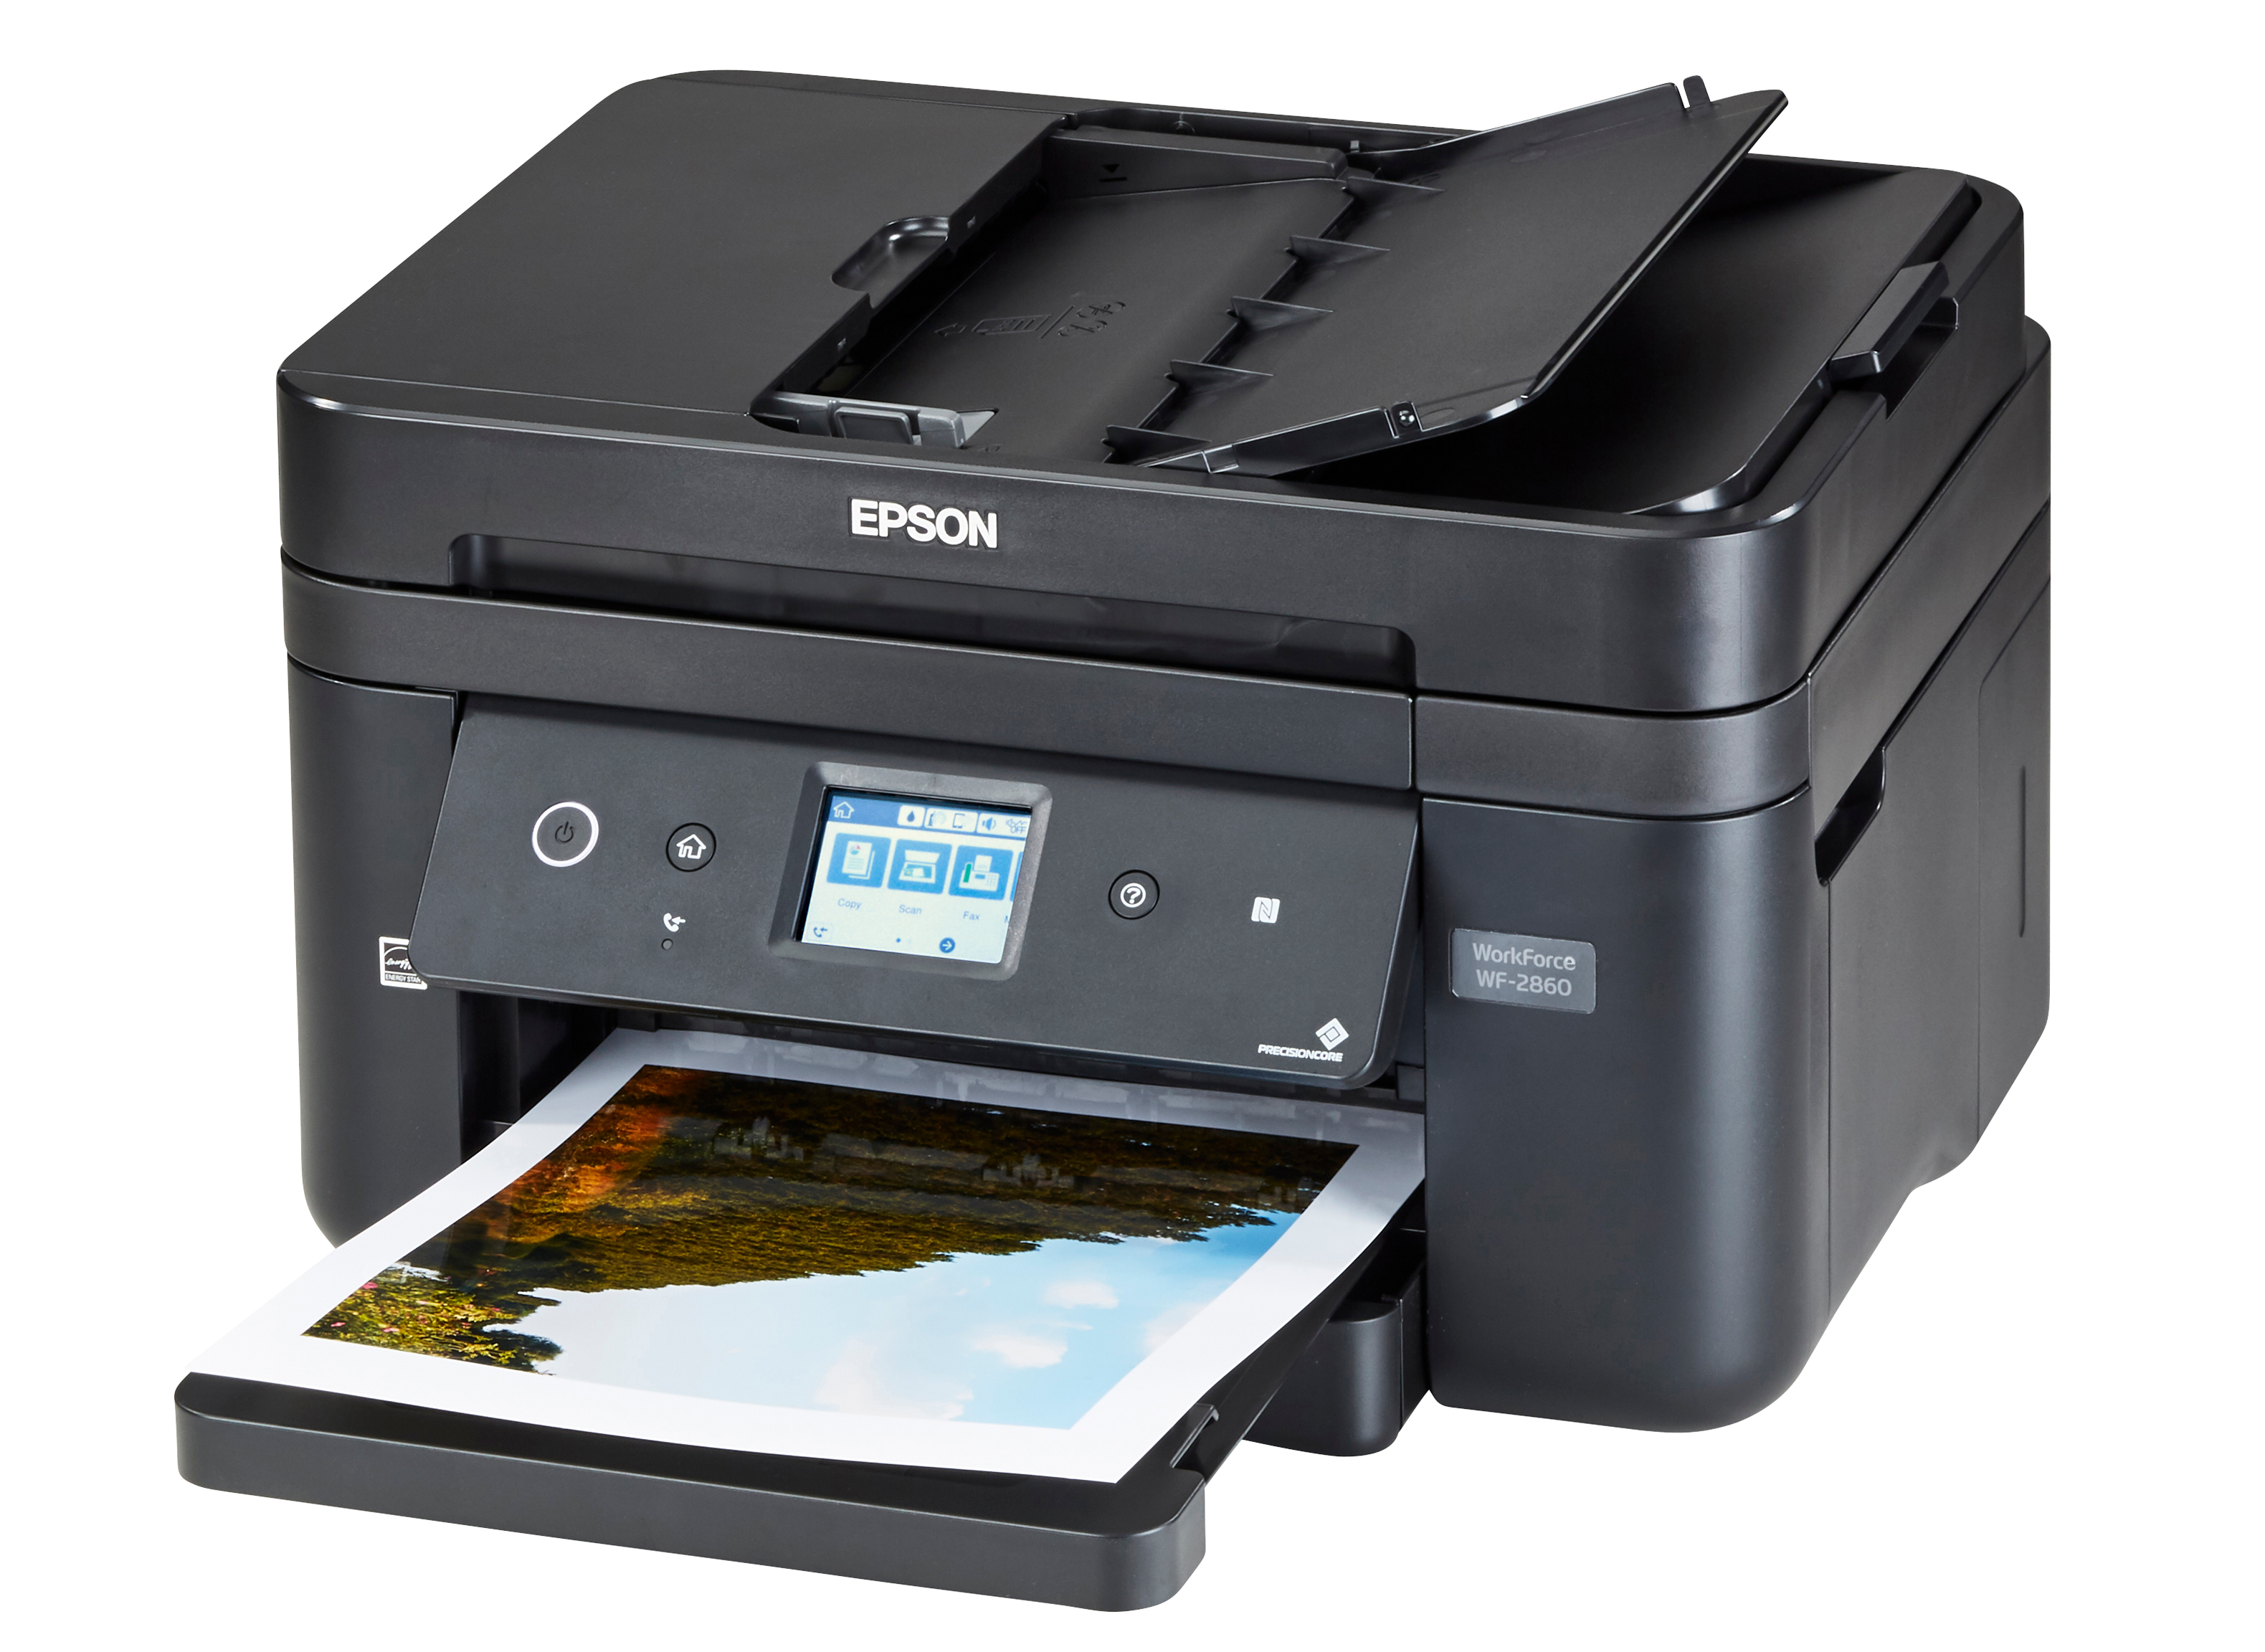 Epson Workforce WF-2860 Printer Review - Consumer Reports